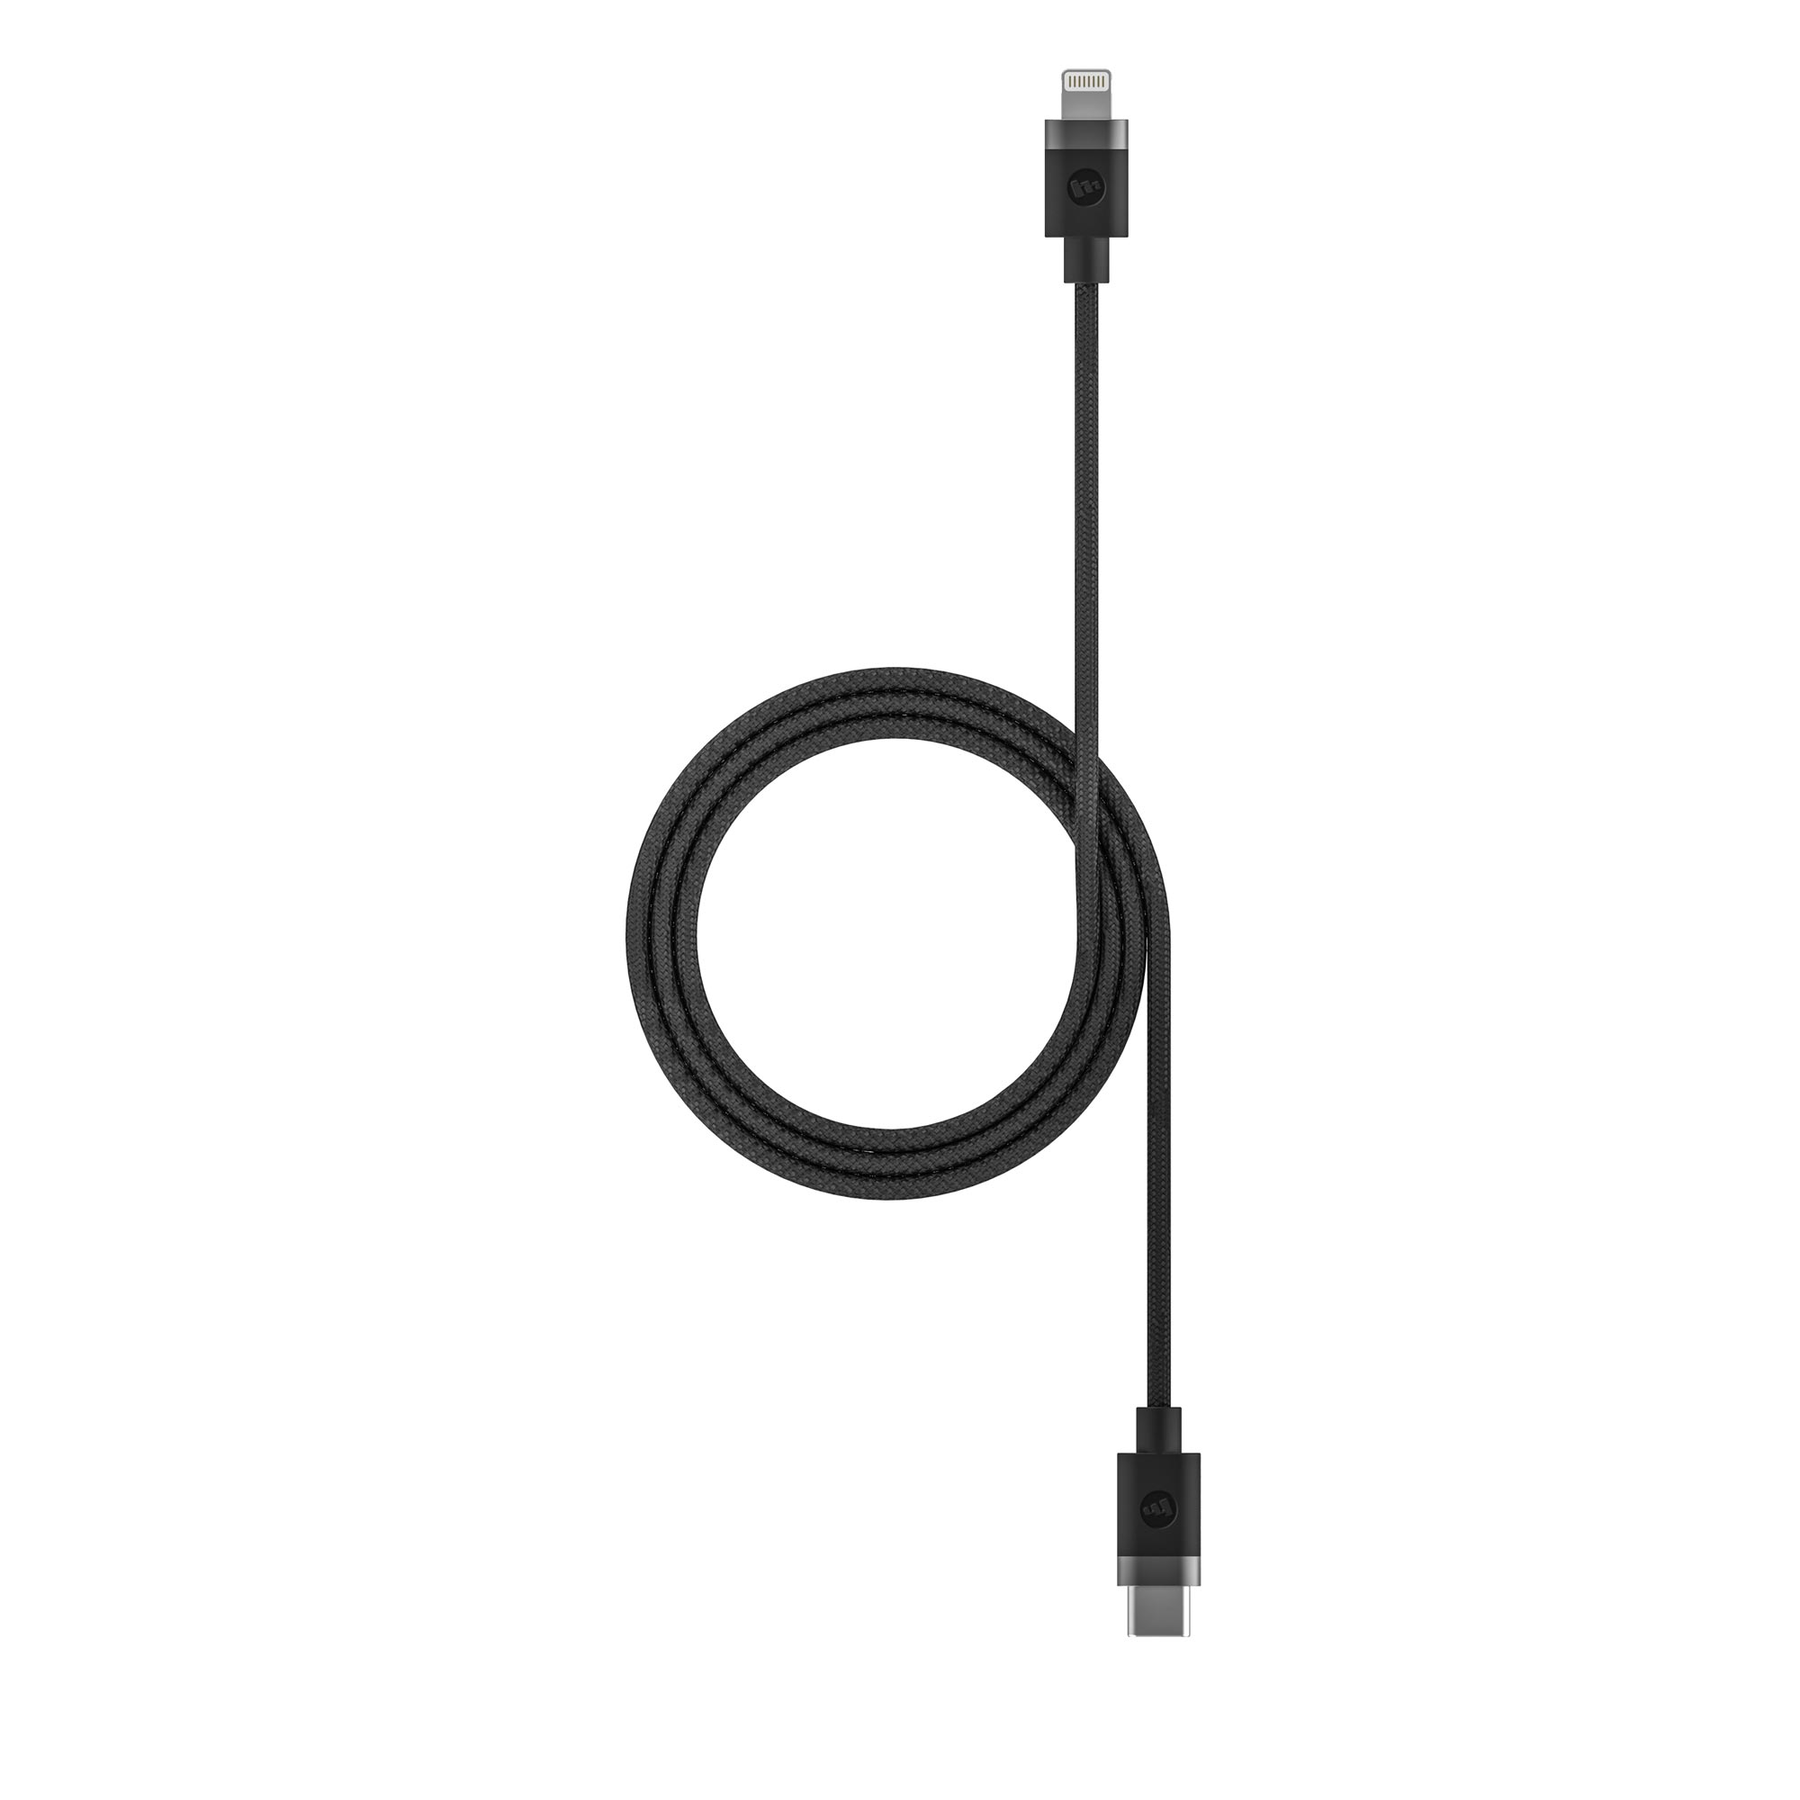 Mophie USB-C to Lightning High Speed Charging Cable